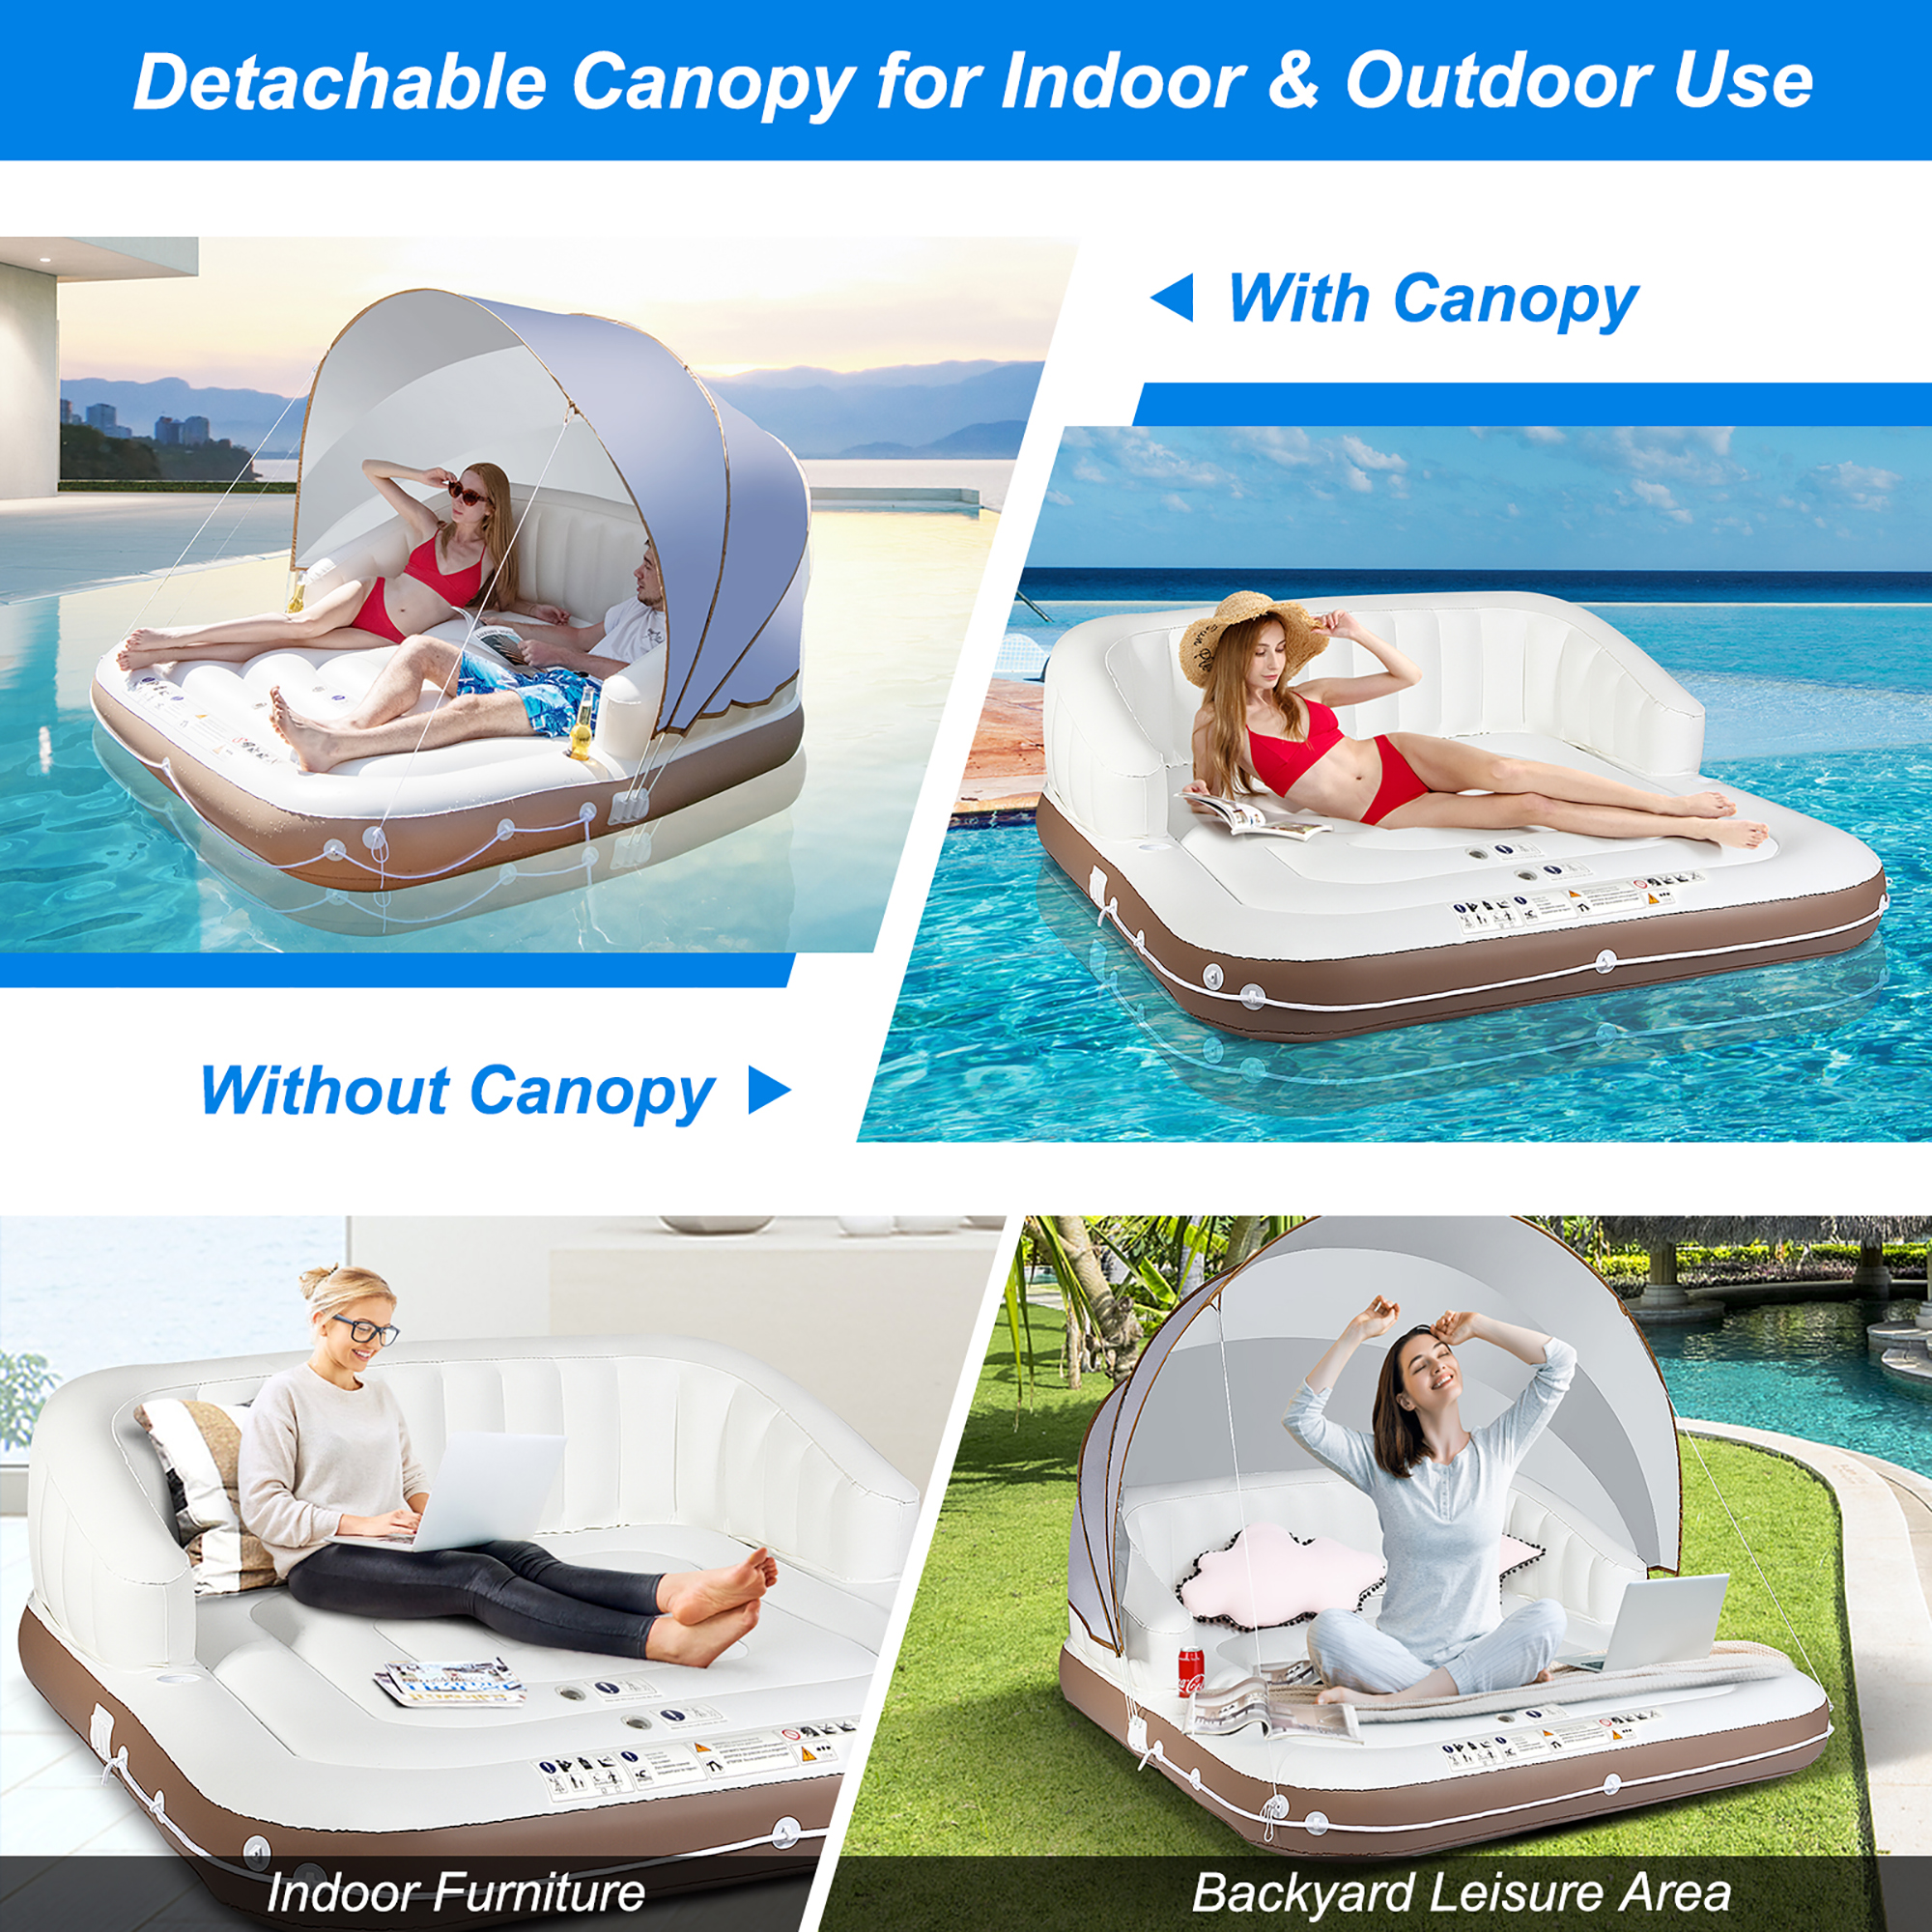 Costway Floating Island Inflatable Swimming Pool Float Lounge Raft with Canopy SPF50+ Retractable Detachable Sunshade with Two Cup Holders White - image 2 of 10